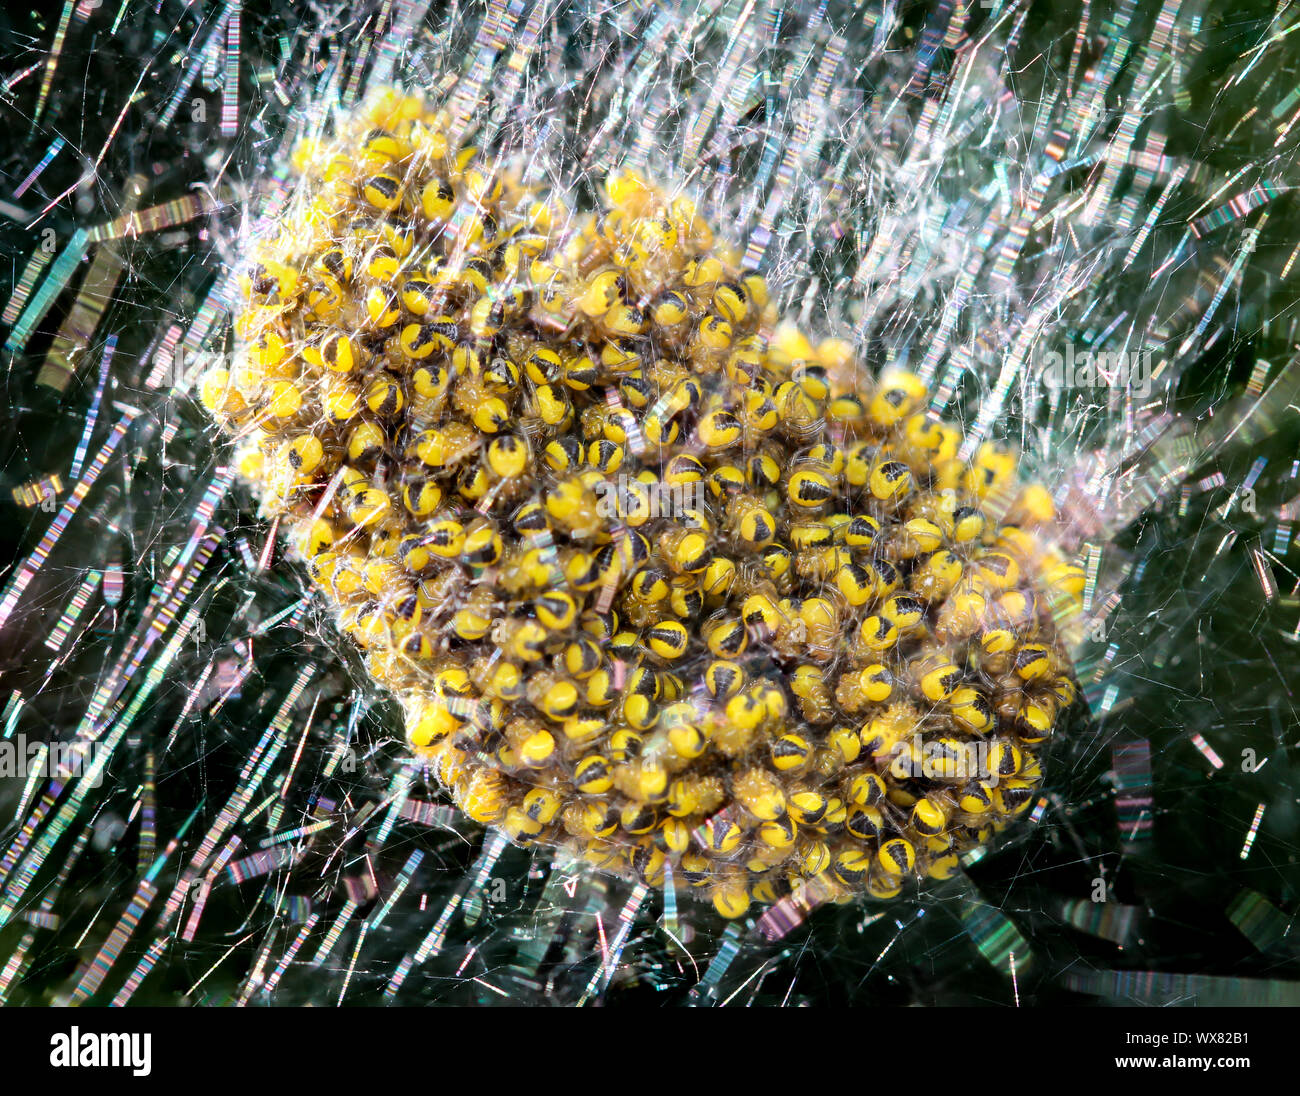 network of baby spiders Stock Photo